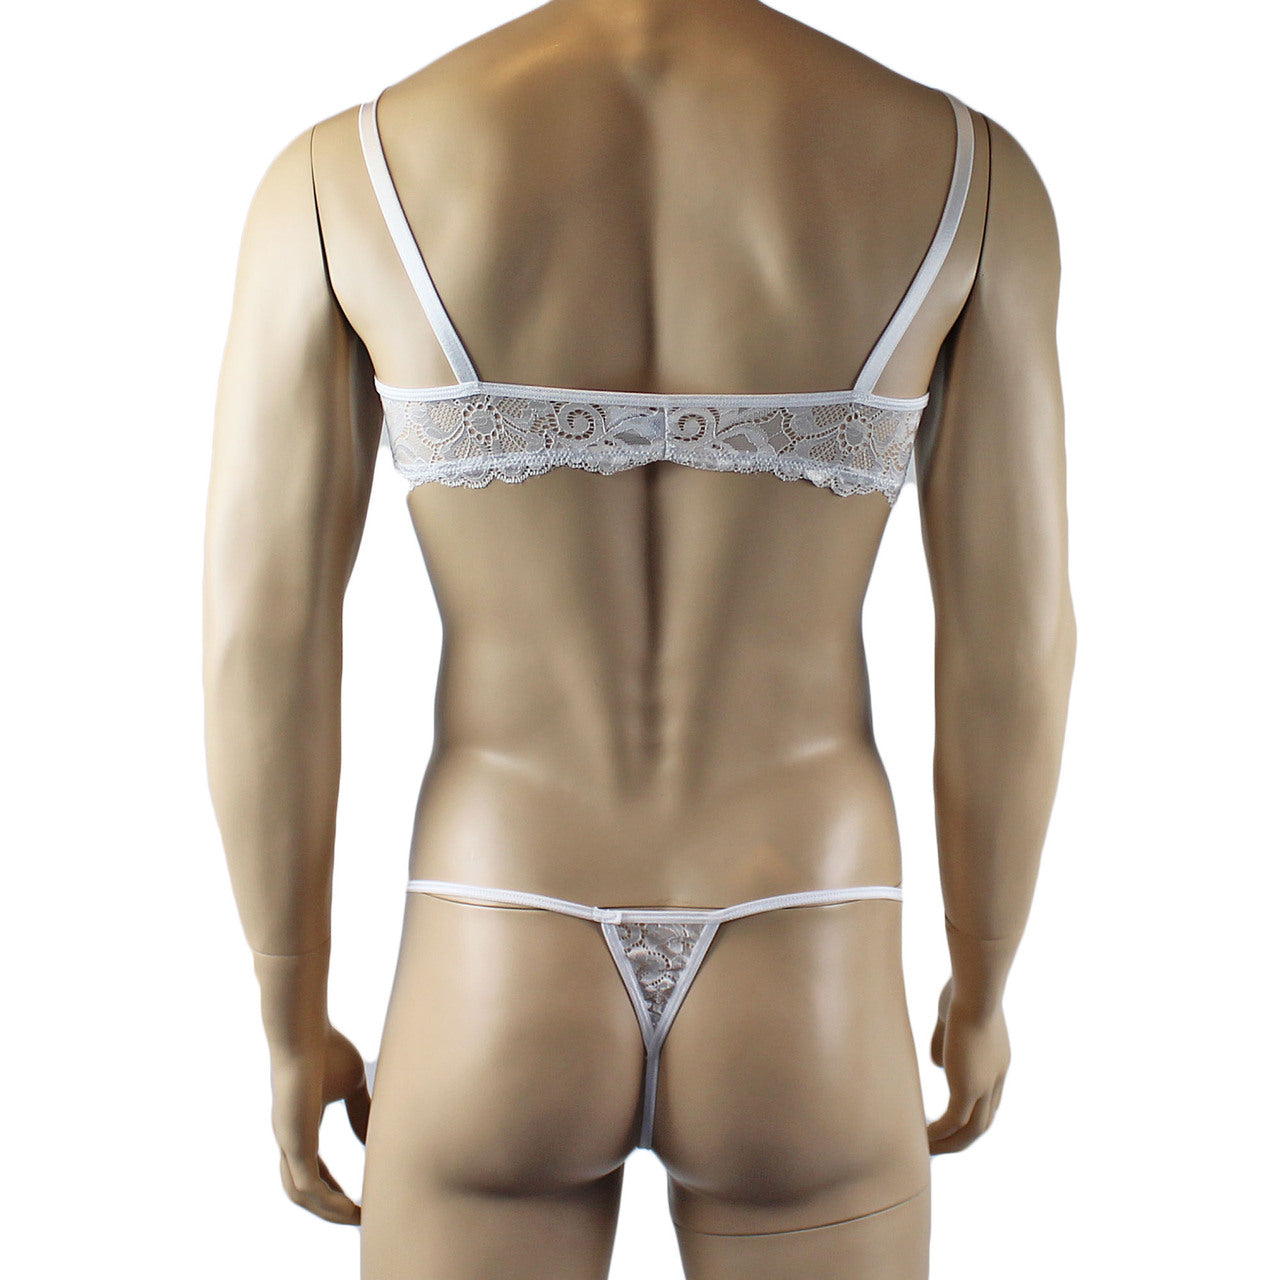 Mens Sweetheart Scalloped Shiny Lace Bra Top and G string White